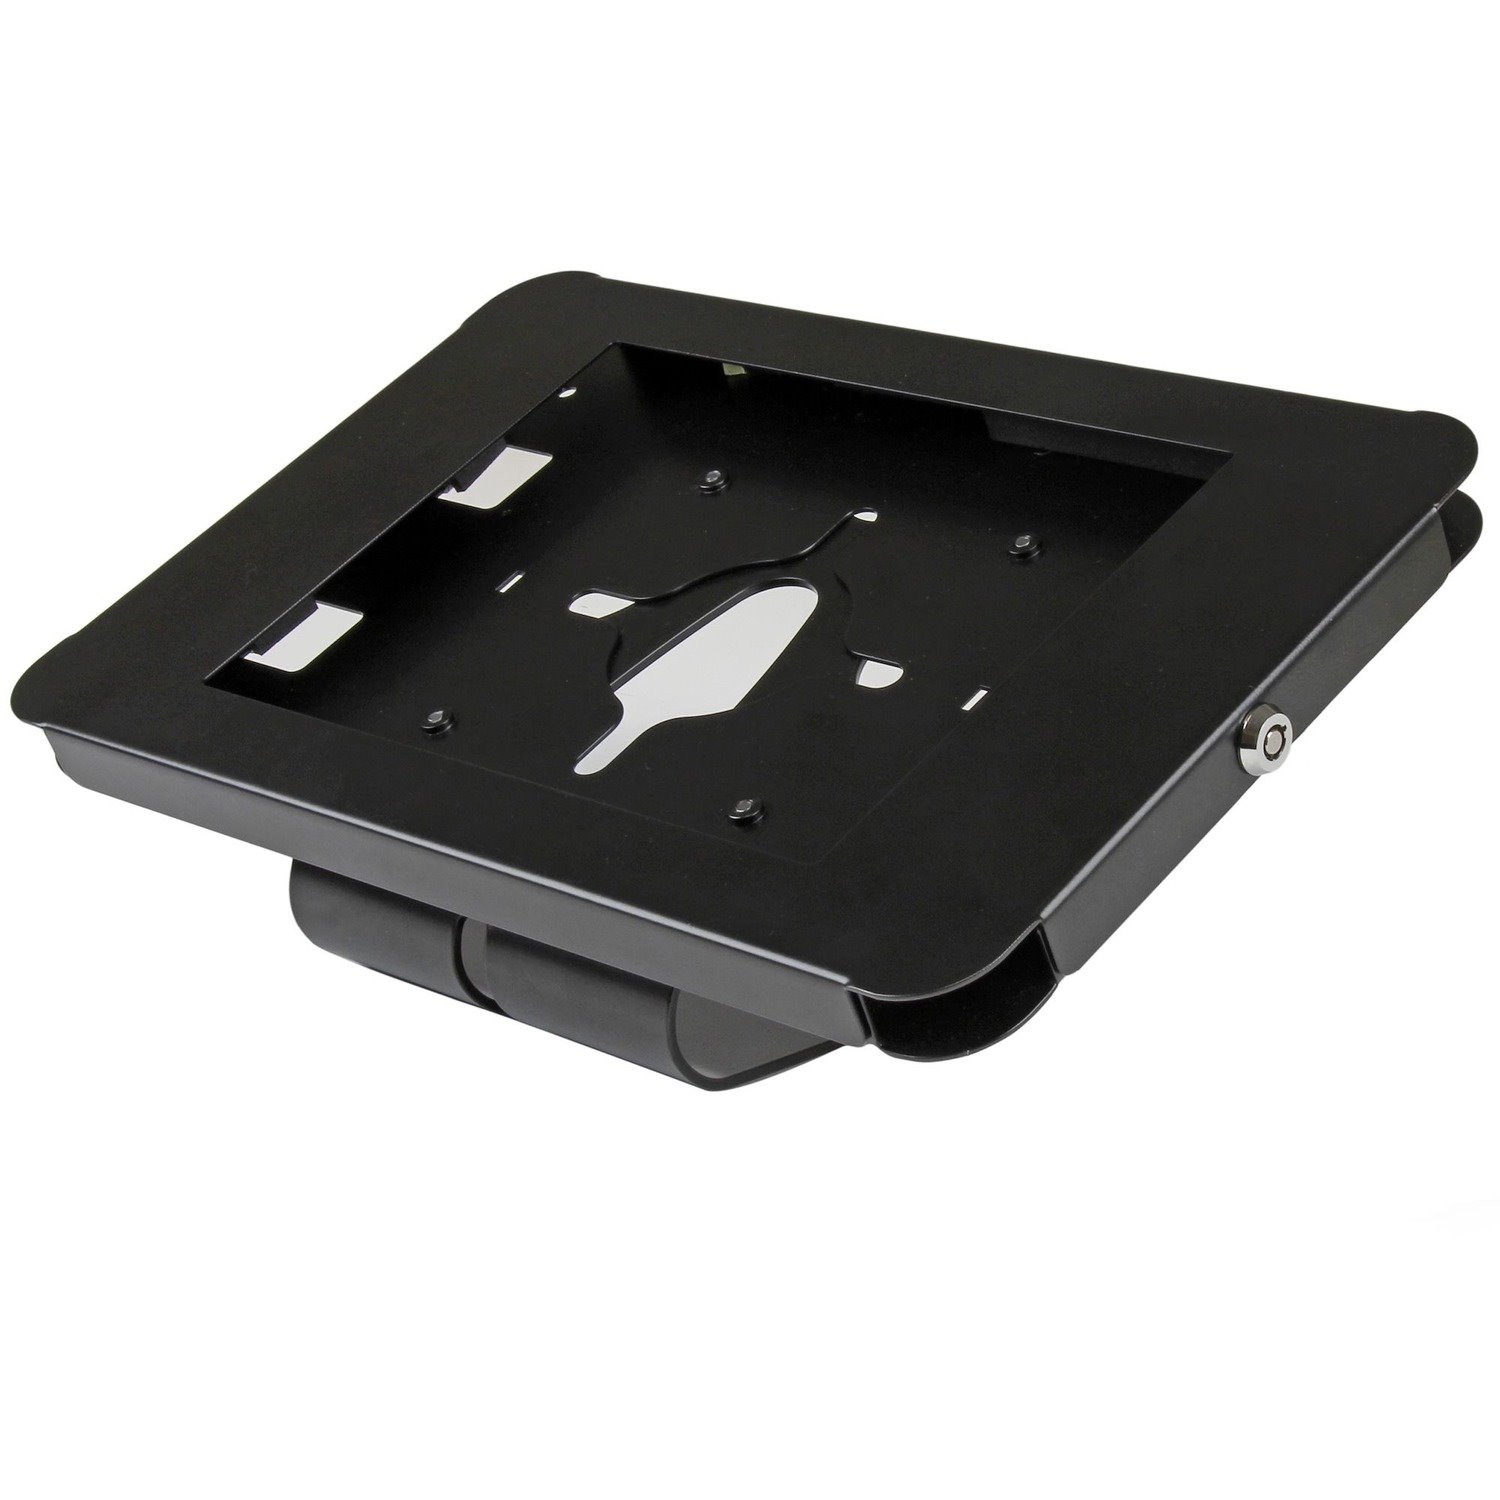 StarTech.com Secure Tablet Stand - Security lock protects your tablet from theft and tampering - Easy to mount to a desk / table / wall or directly to a VESA compatible monitor mount - Supports iPad and other 9.7" tablets - Steel Construction - Thread the tablet's charge cable through the bottom of the holder